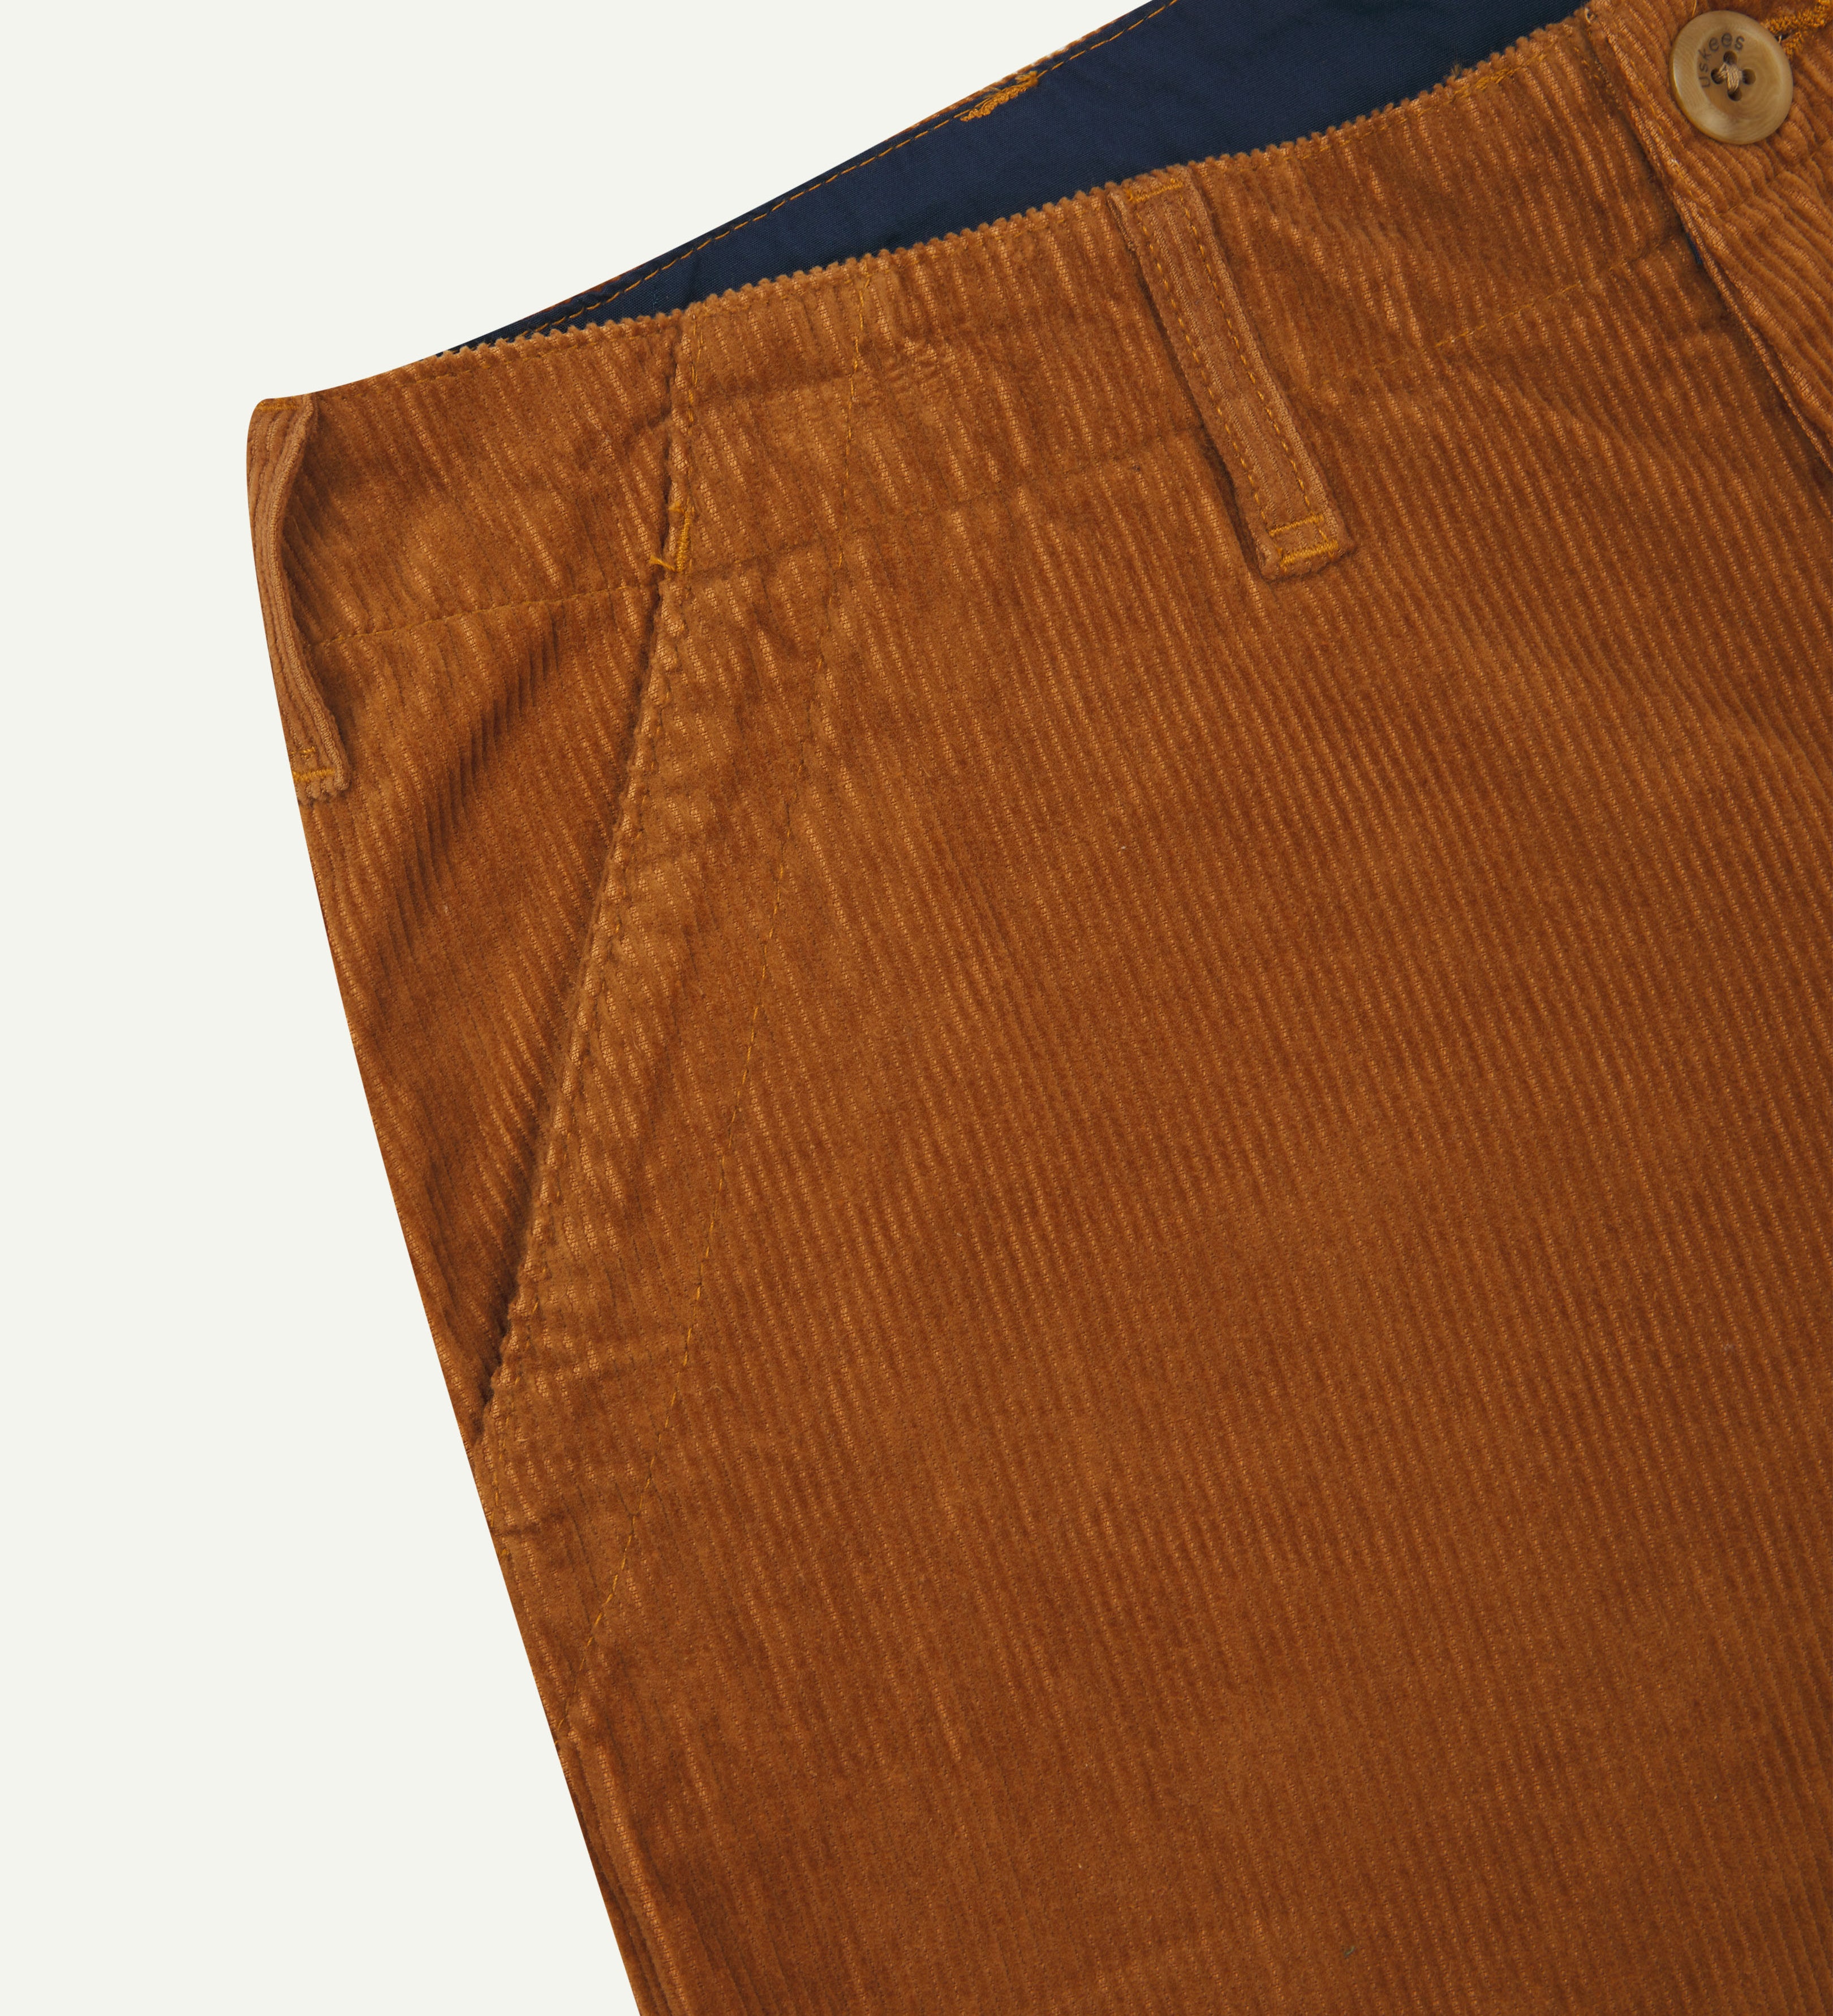 Close-up view of #5005 Uskees cord workwear pants in tan showing triple stitching.